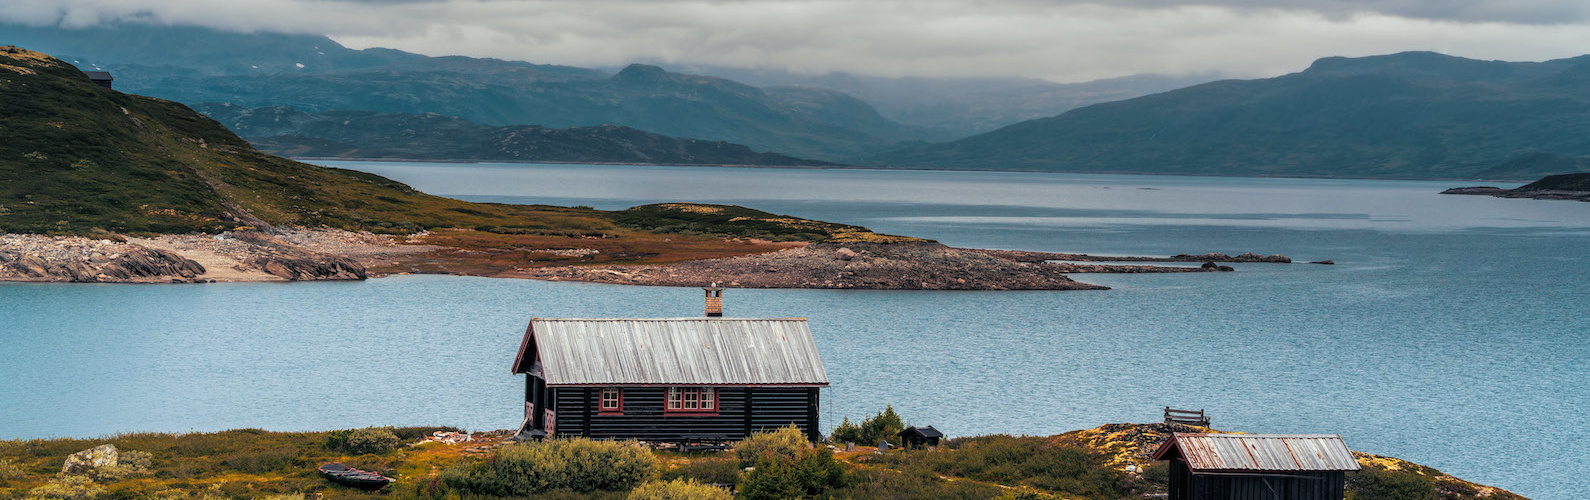 Hidden in Plain Sight: One of Norway’s Most Beautiful Lakes